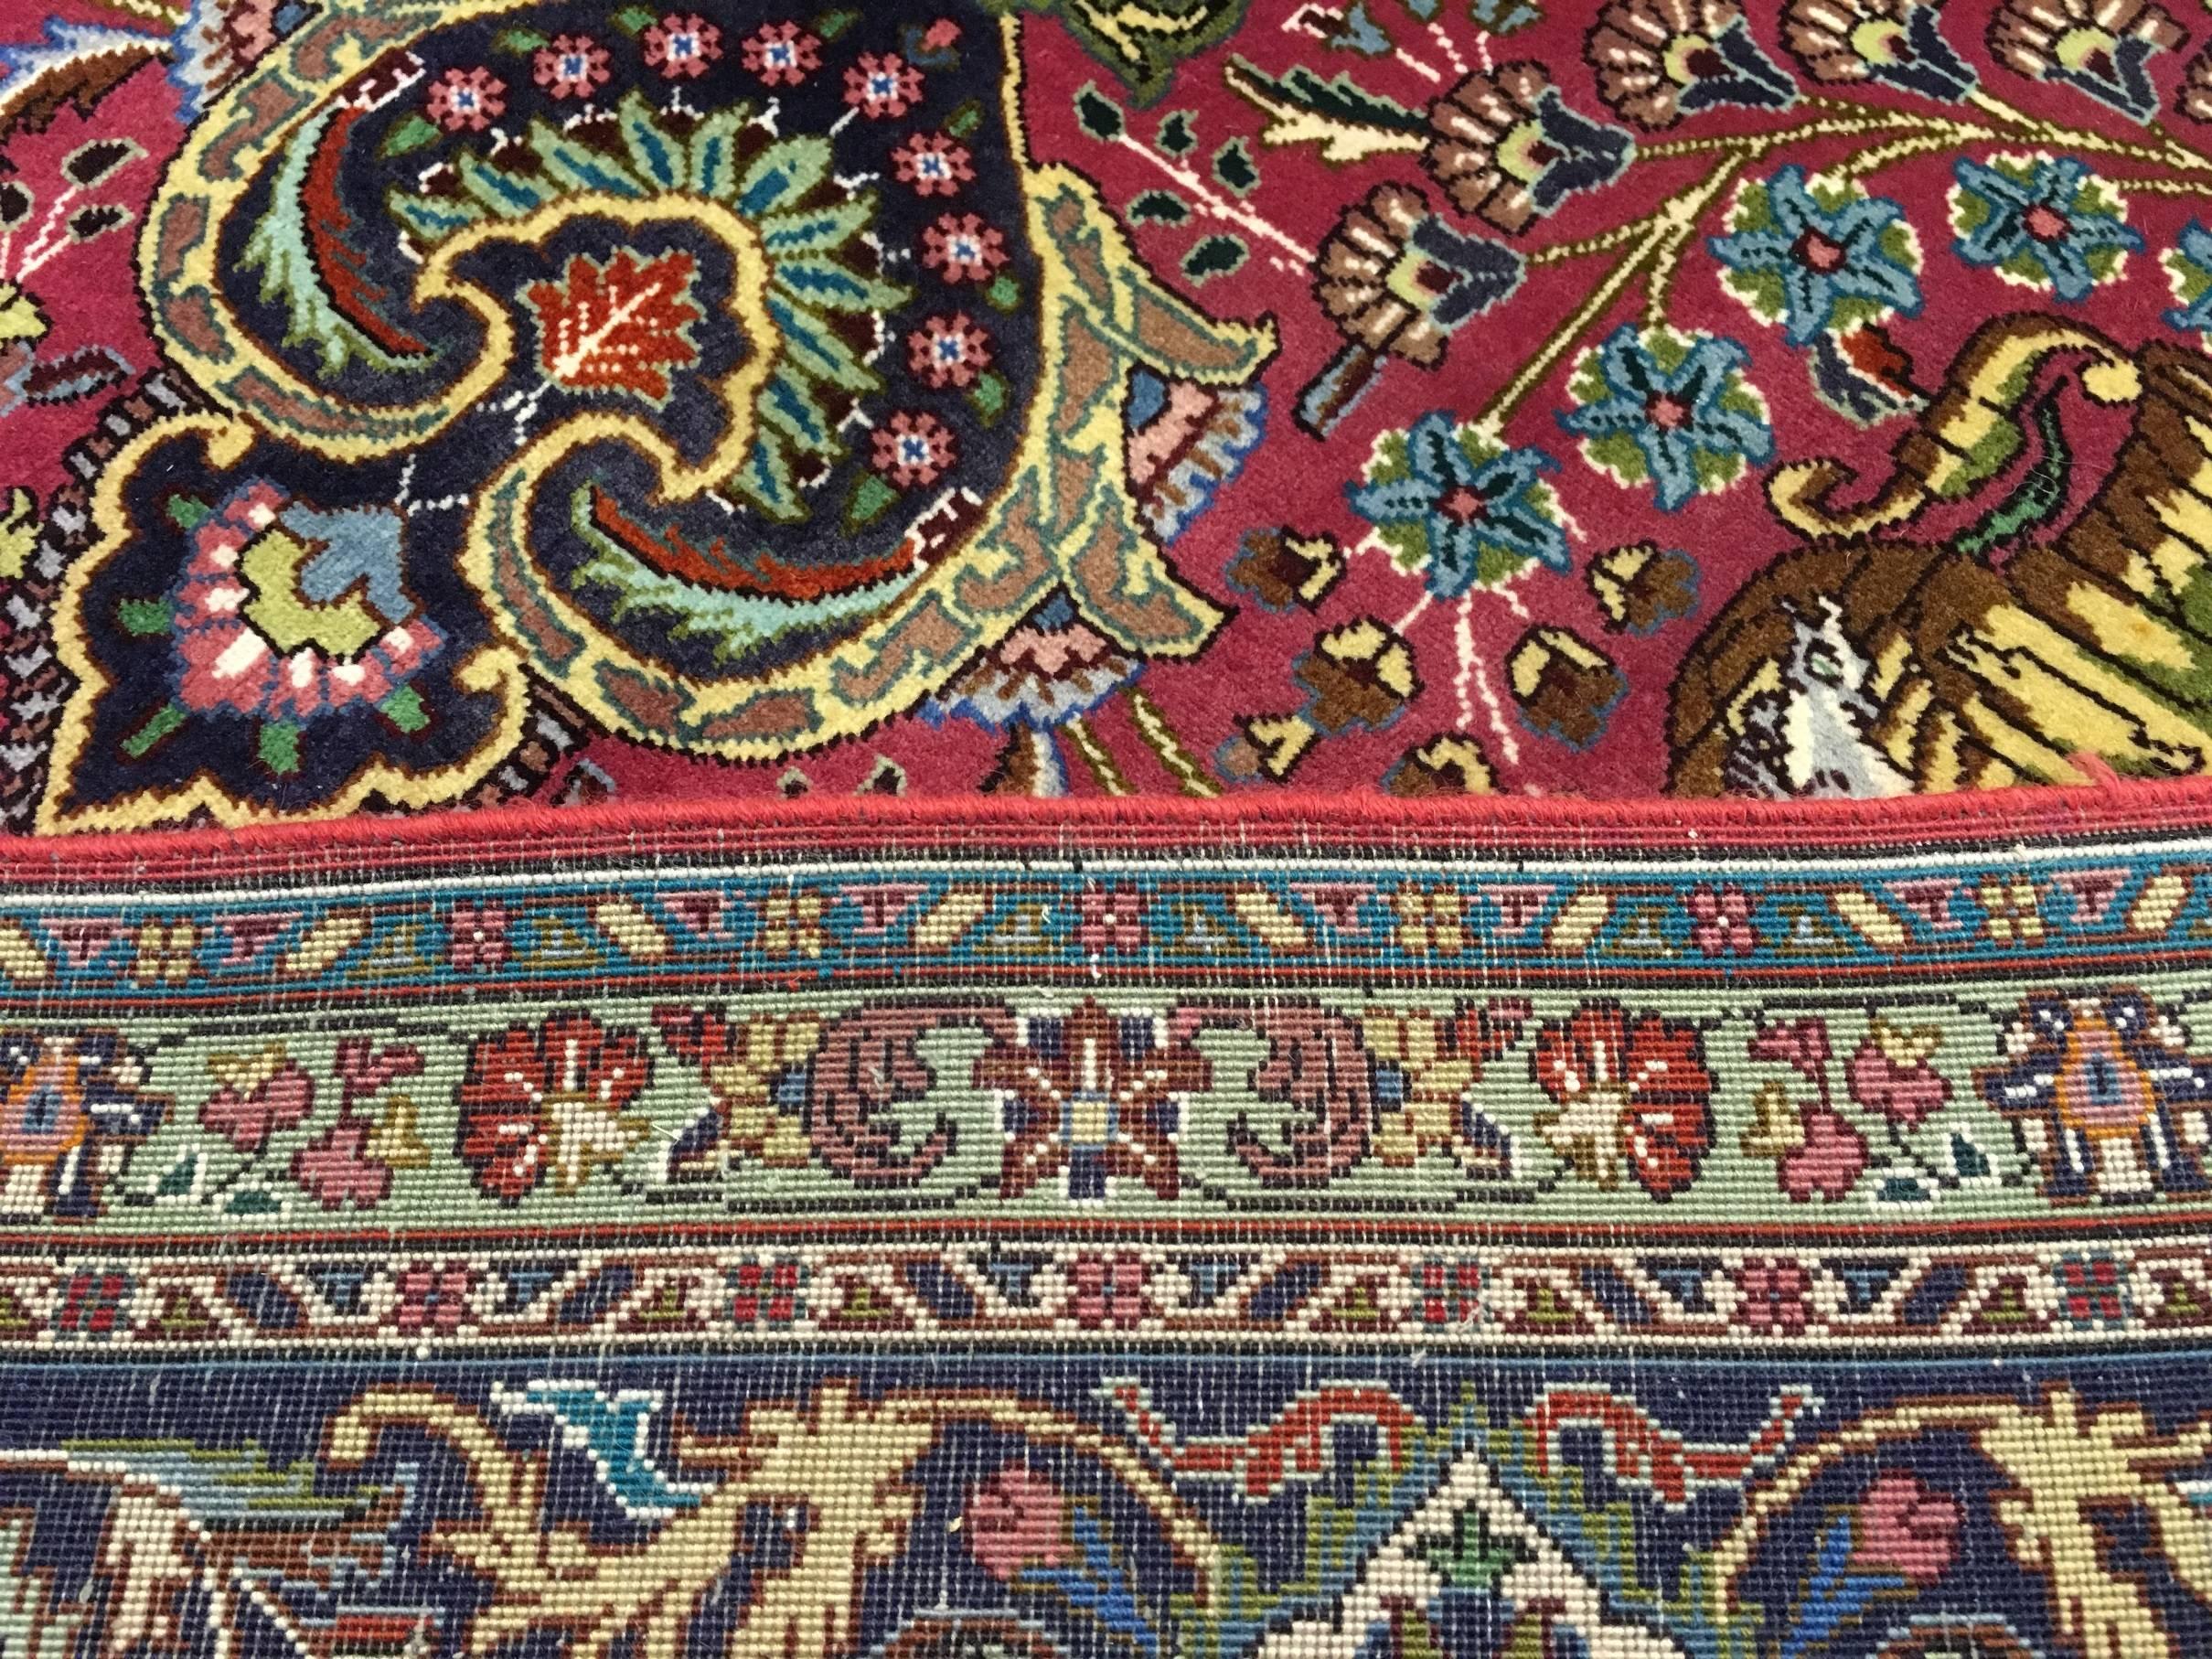 Persian Tabriz Masters 20th Century Oriental Rug In Excellent Condition For Sale In Katy, TX